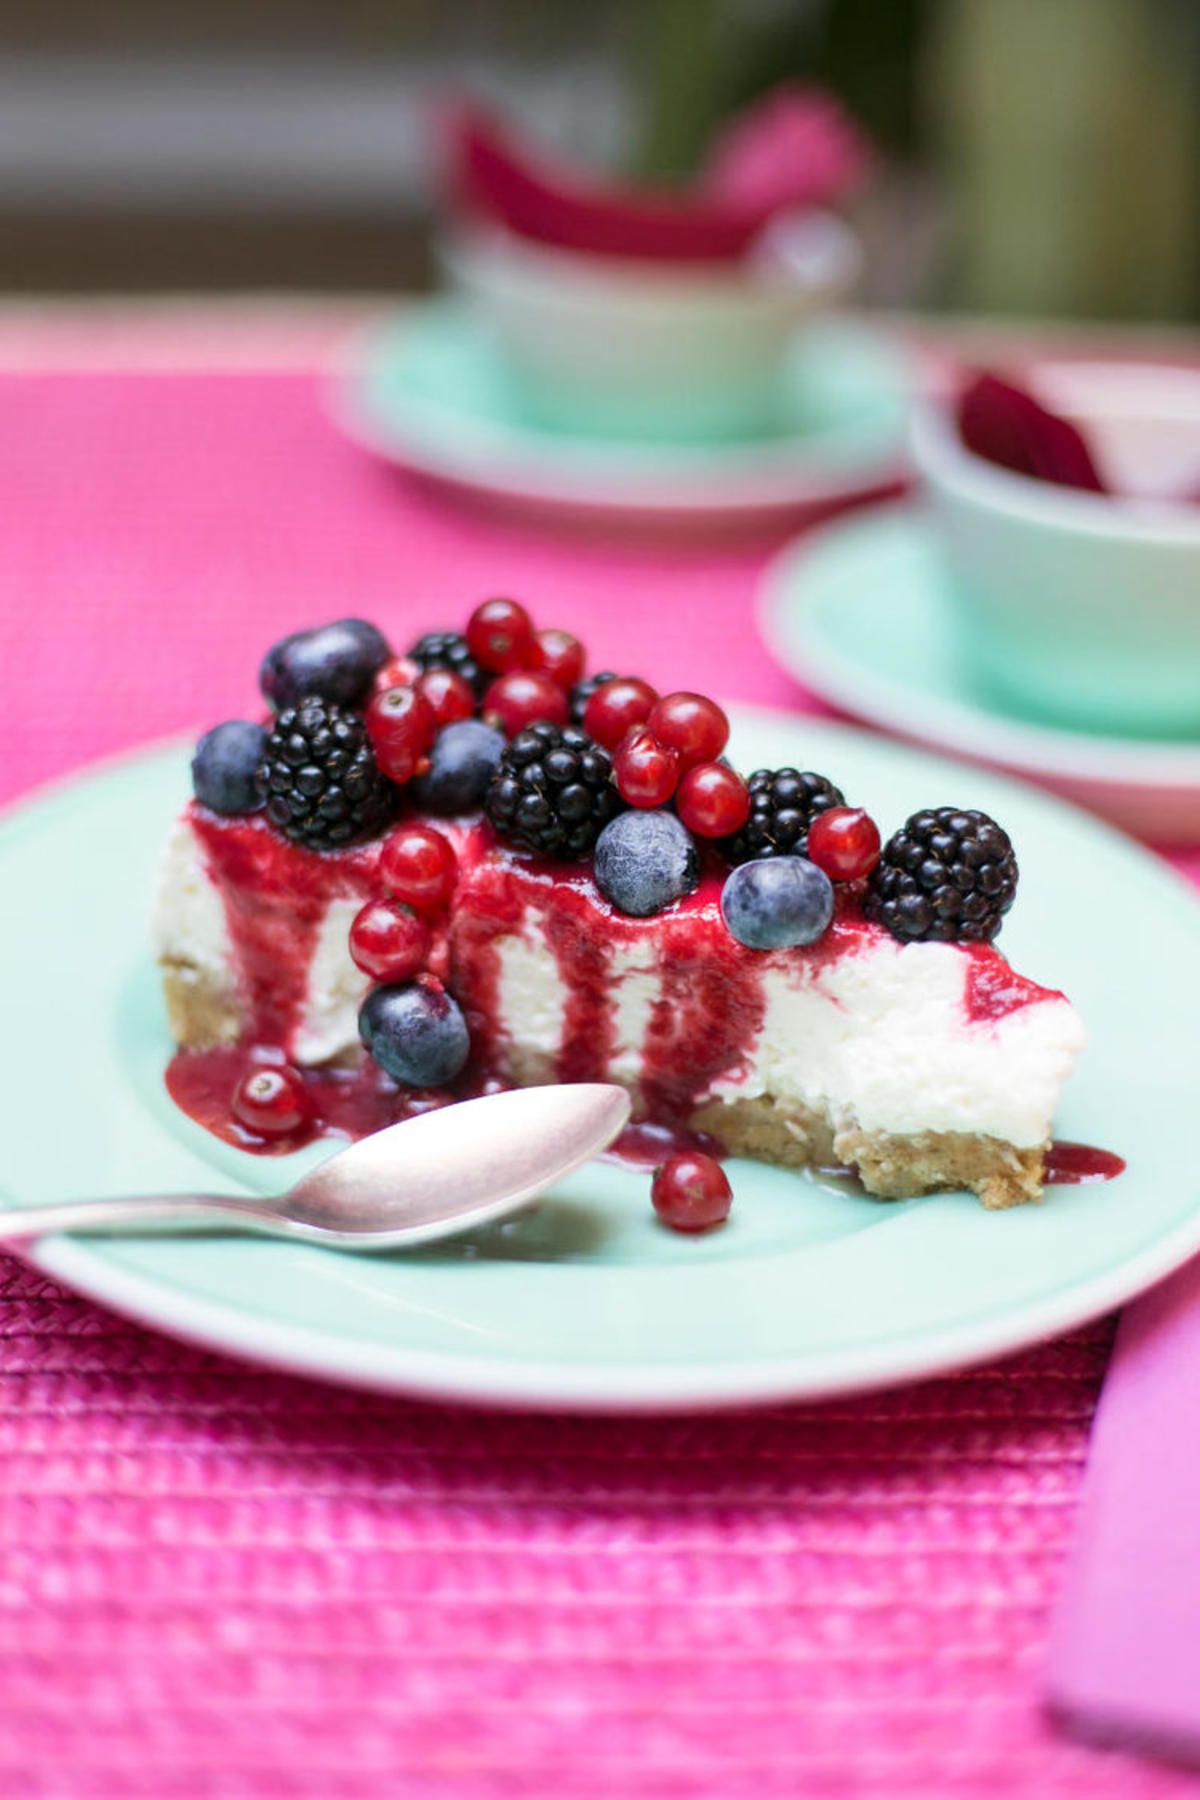 CHEESECAKE AND ITS SUMMER VARIETIES